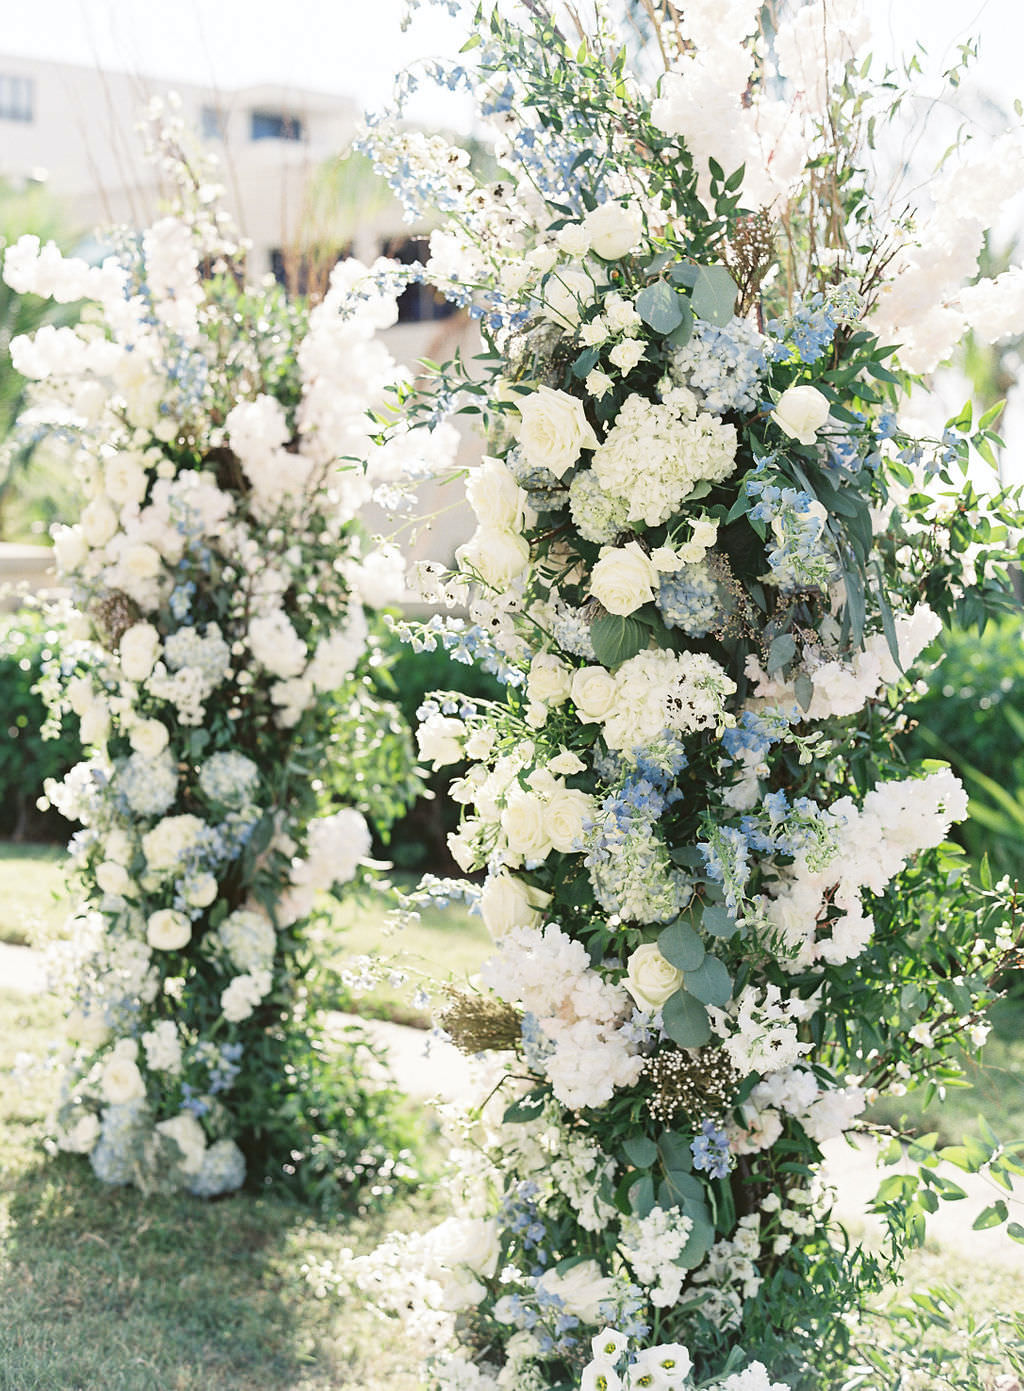 Luxurious, Garden Inspired Wedding Ceremony Decor, Lush Ivory Flowers, White Roses, Blue Hibiscuses, Thistle, Baby's Breath, and Greenery | Florida Destination Wedding Planner NK Productions Wedding Planning